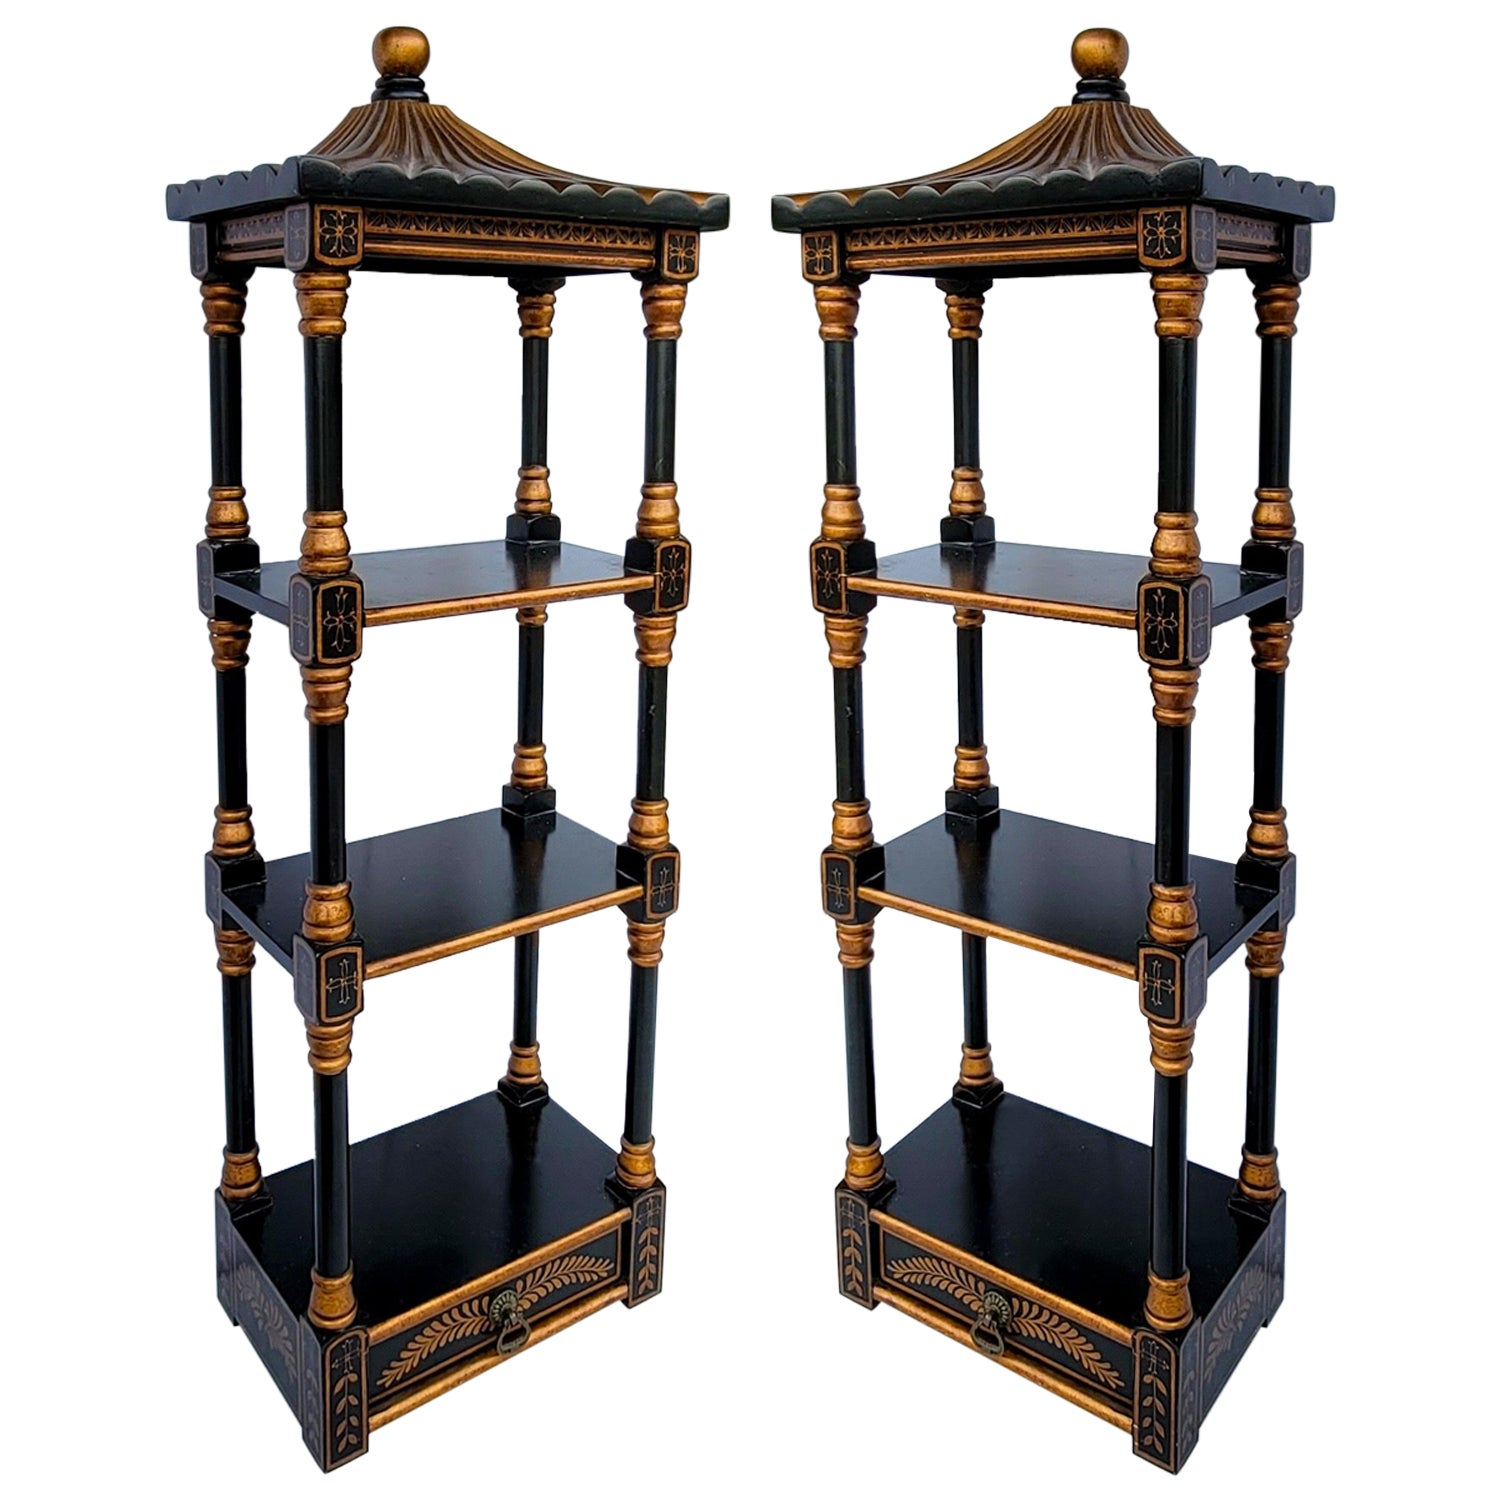 Late 20th-C. Black and Gold Pagoda Form Chinoiserie Wall Shelves -Pair